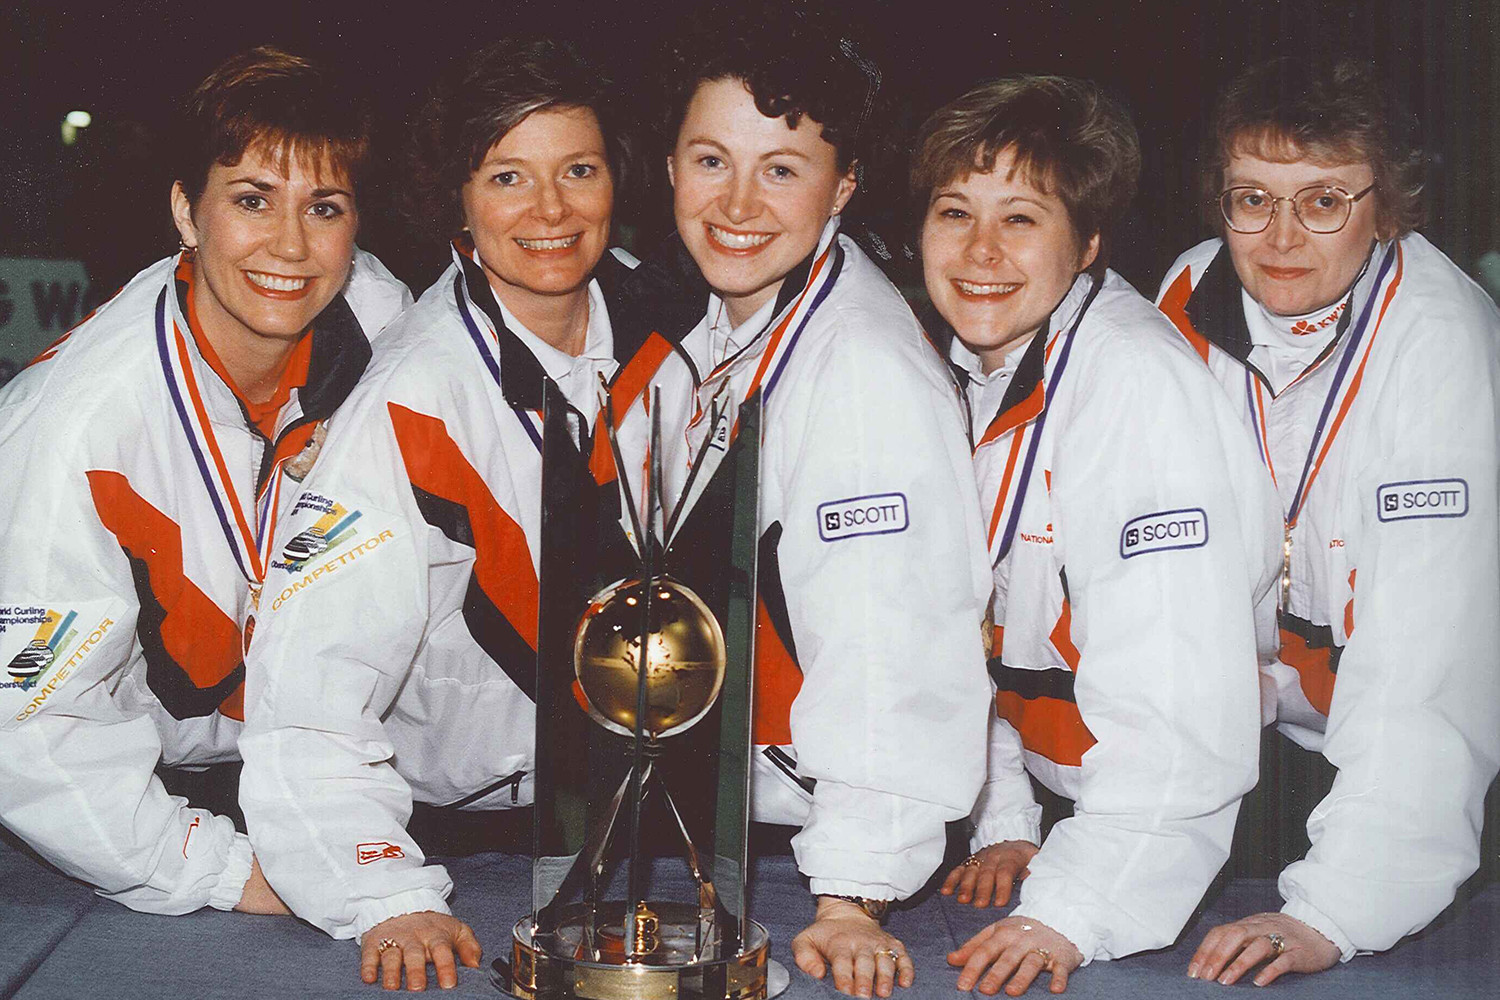 The remaining members of Team Schirmler have been inducted into the WCF Hall of Fame ©Curling Canada